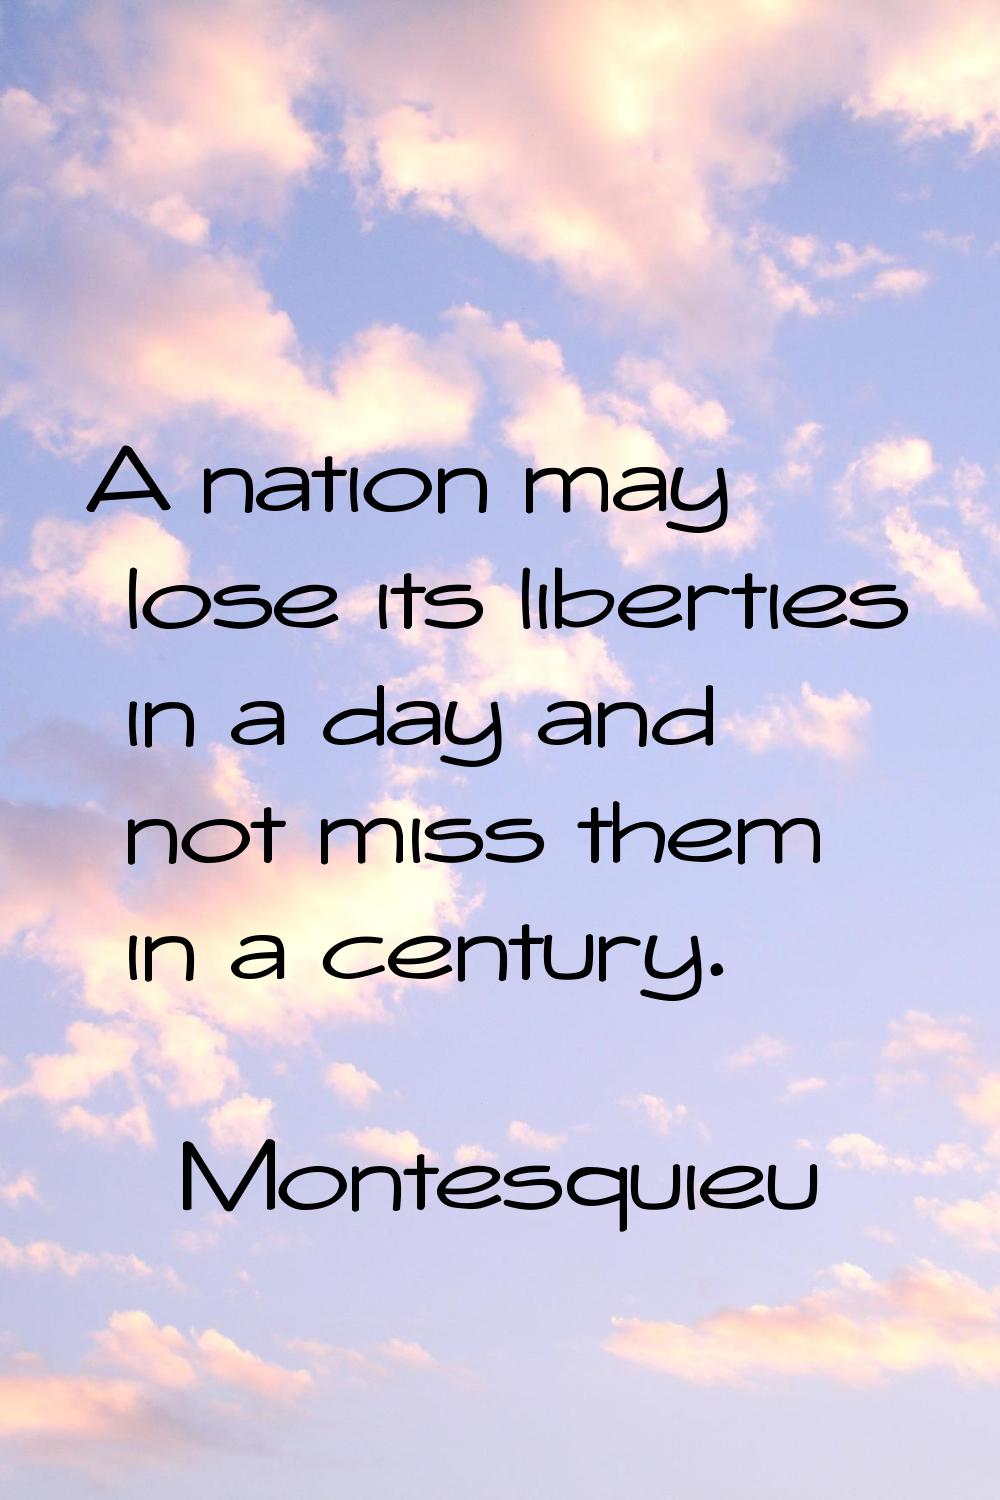 A nation may lose its liberties in a day and not miss them in a century.